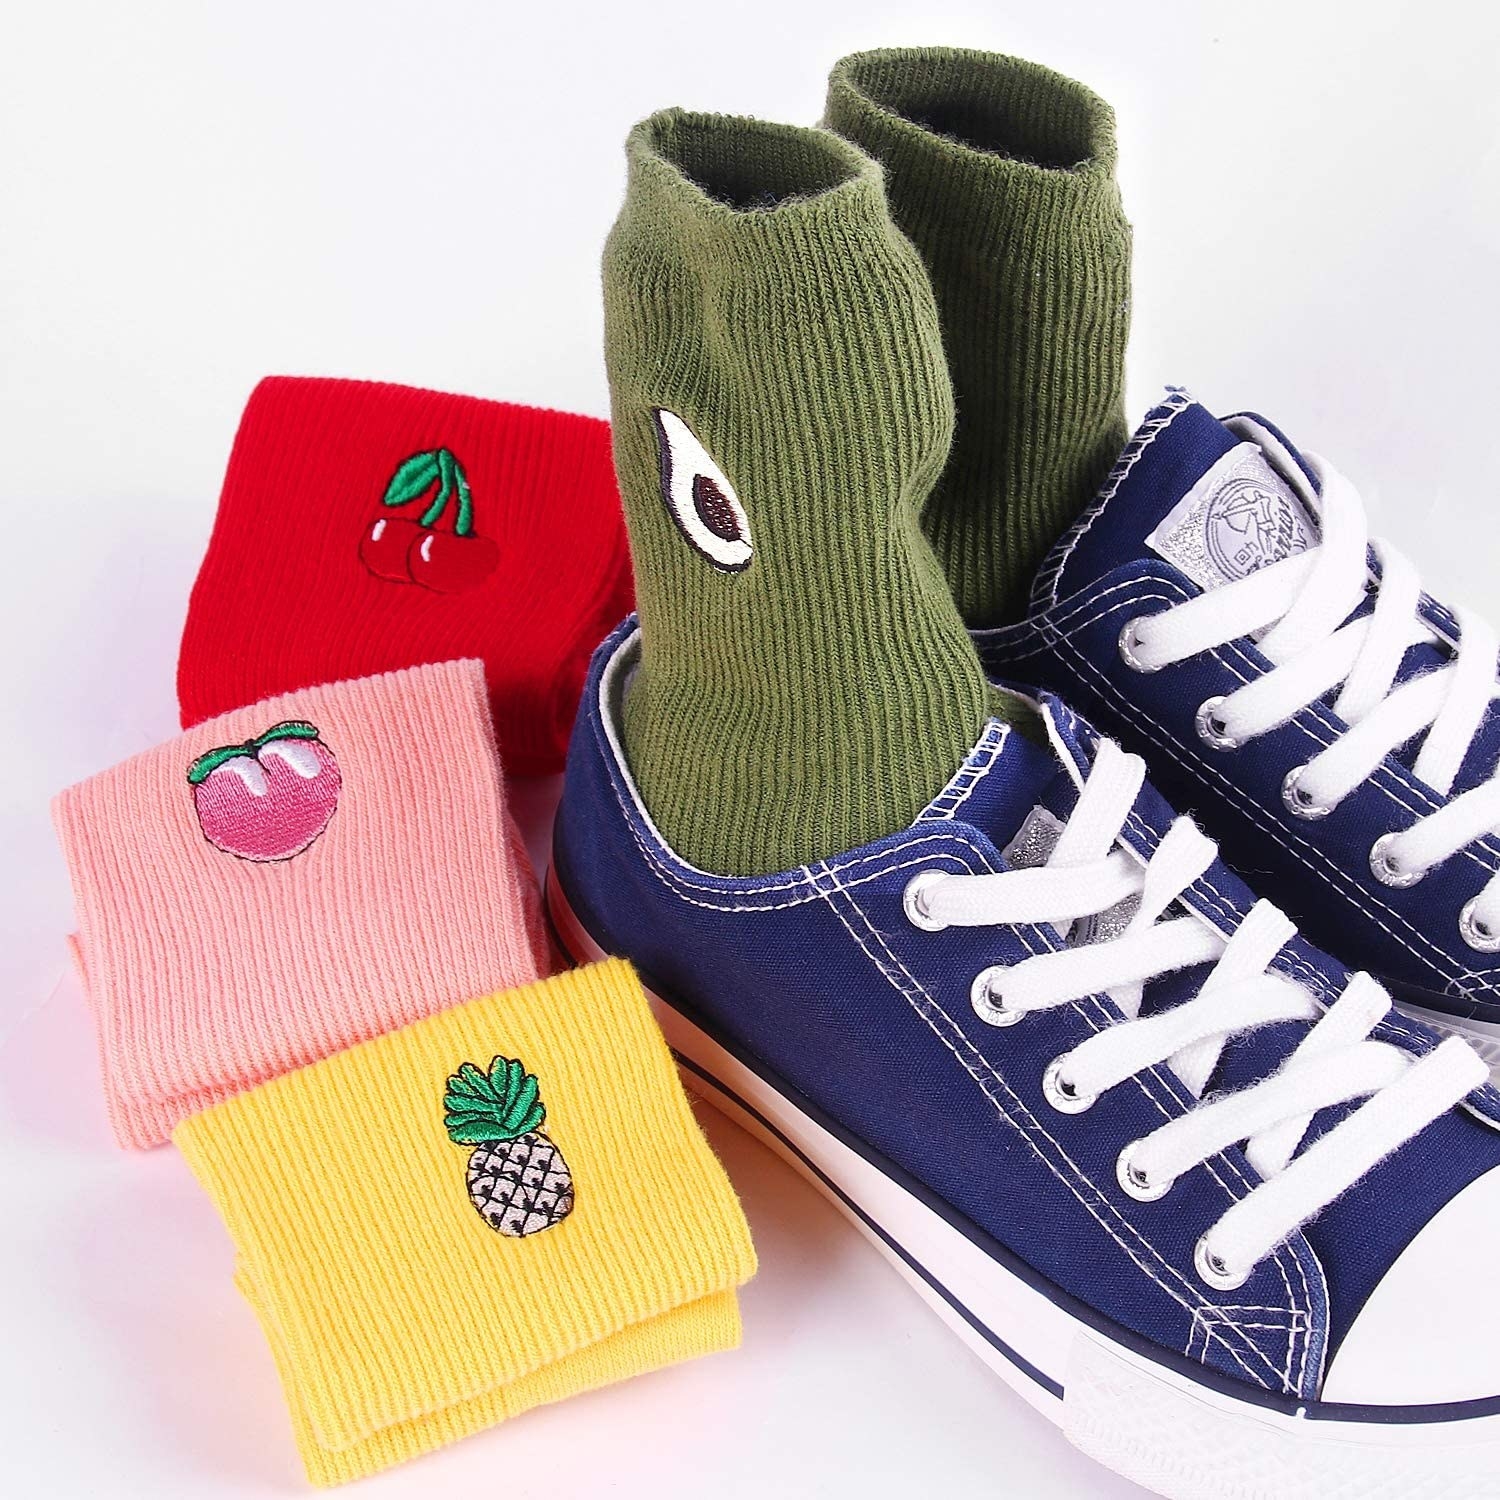 The socks with embroidered fruit on the ankles: green with avocados, red with cherries, pink with peaches, and yellow with pineapples